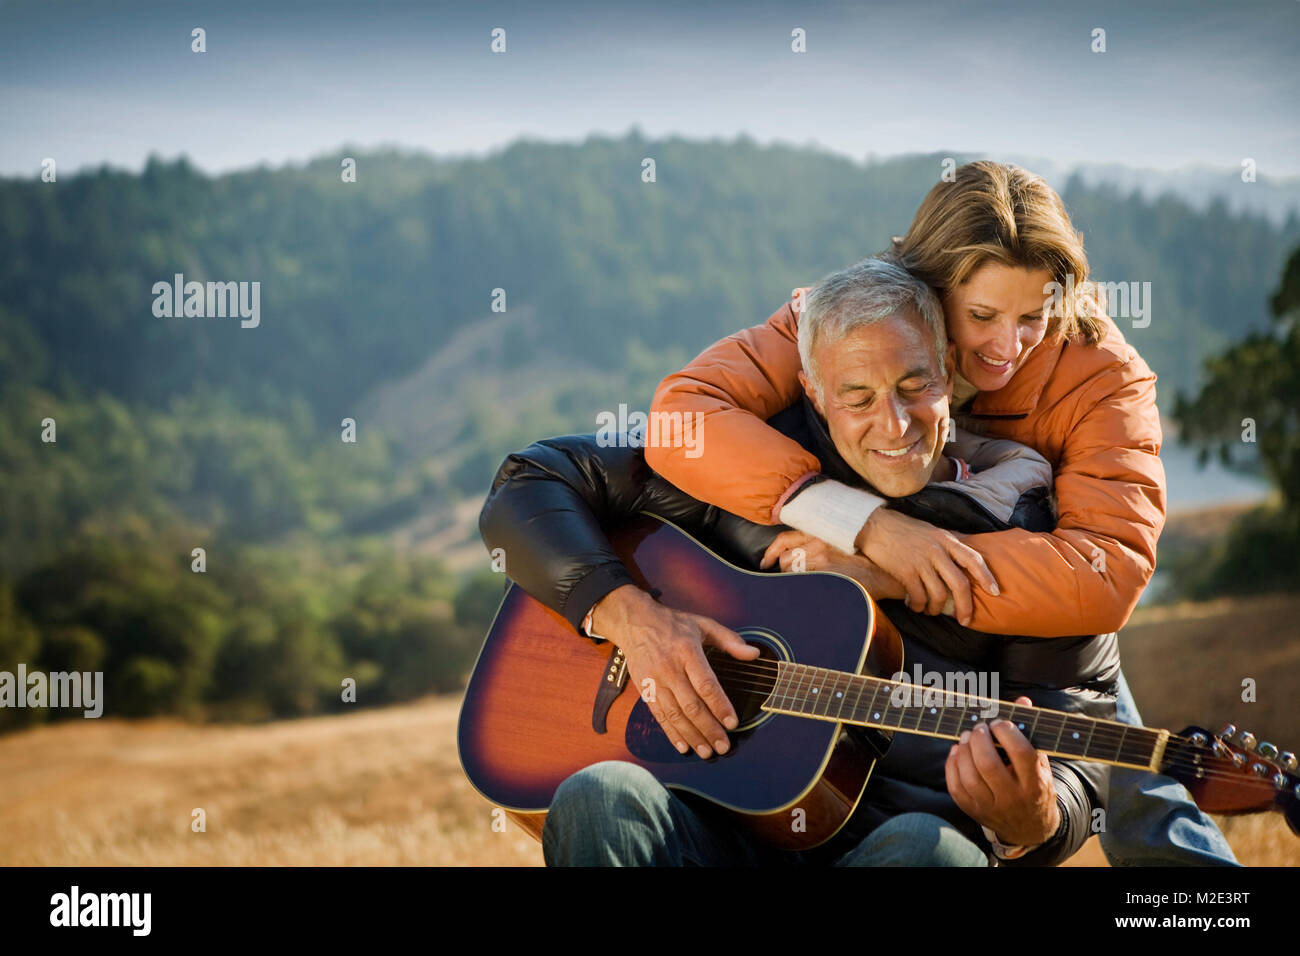 Woman hugging man playing guitar Banque D'Images